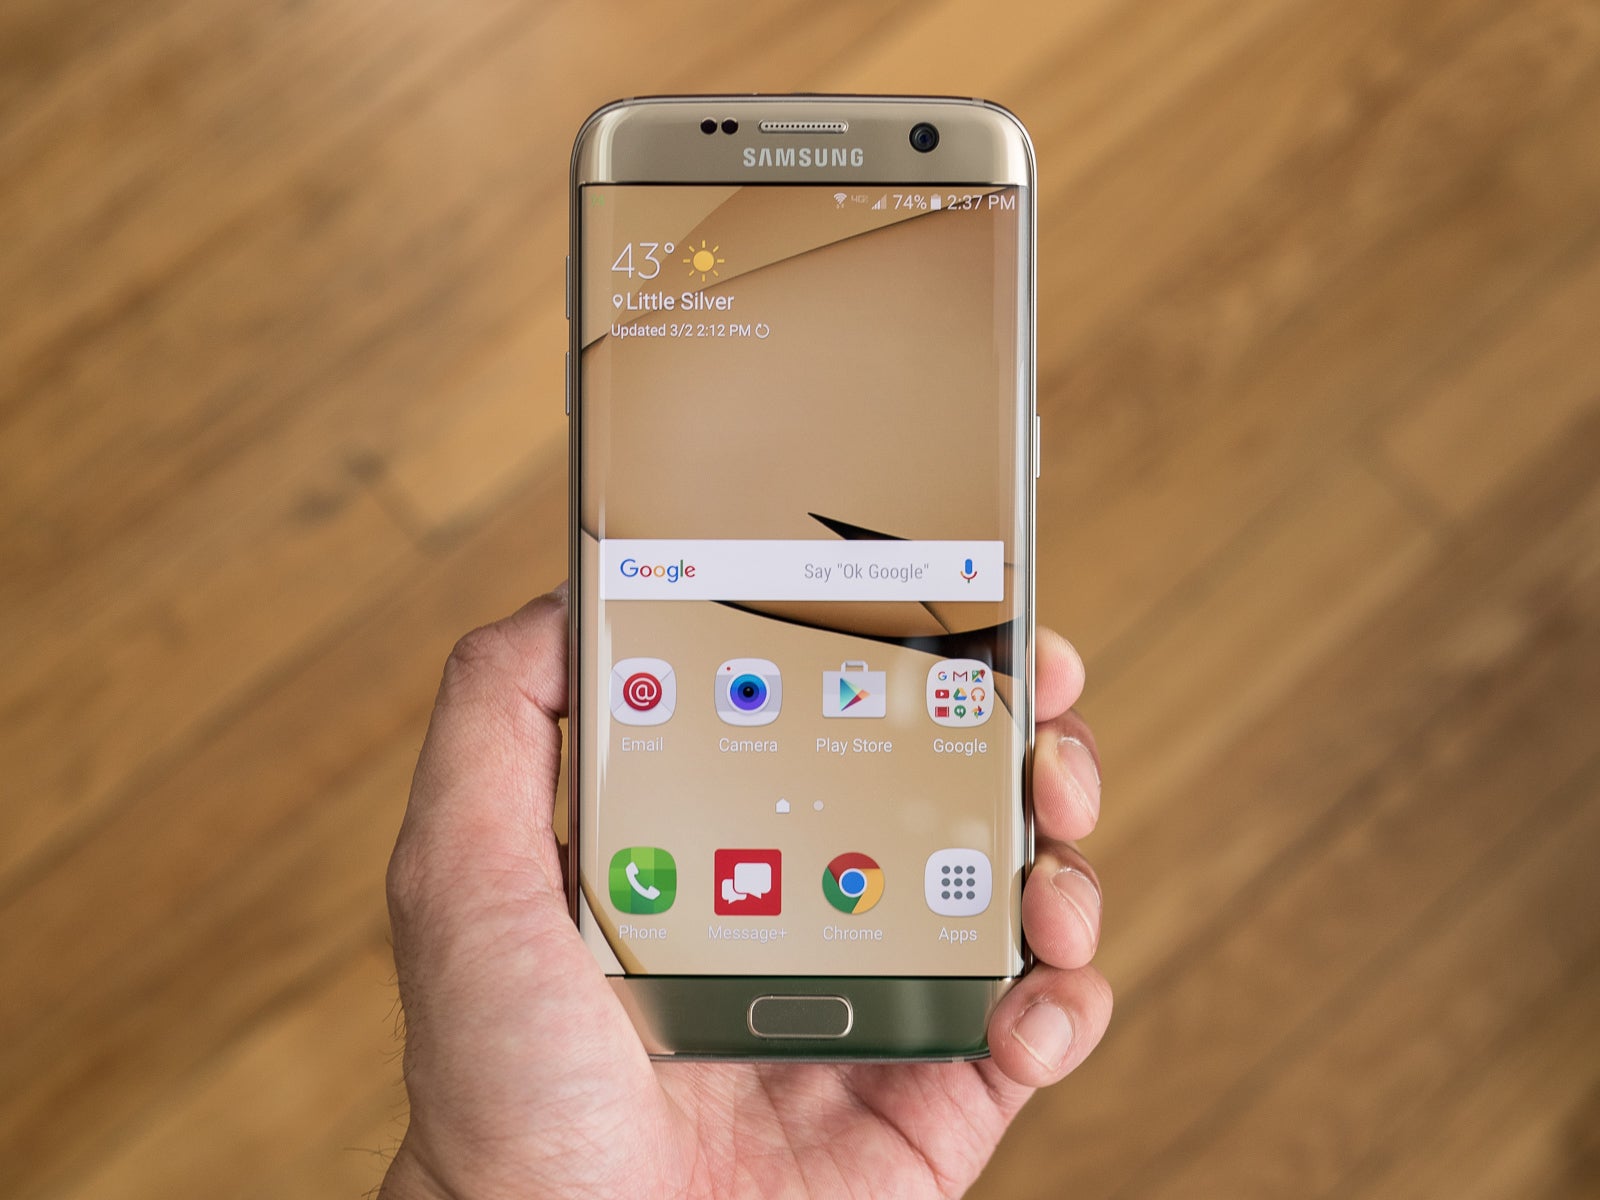 Galaxy S7 edge unit mysteriously receives Android Oreo update, see the software in this video